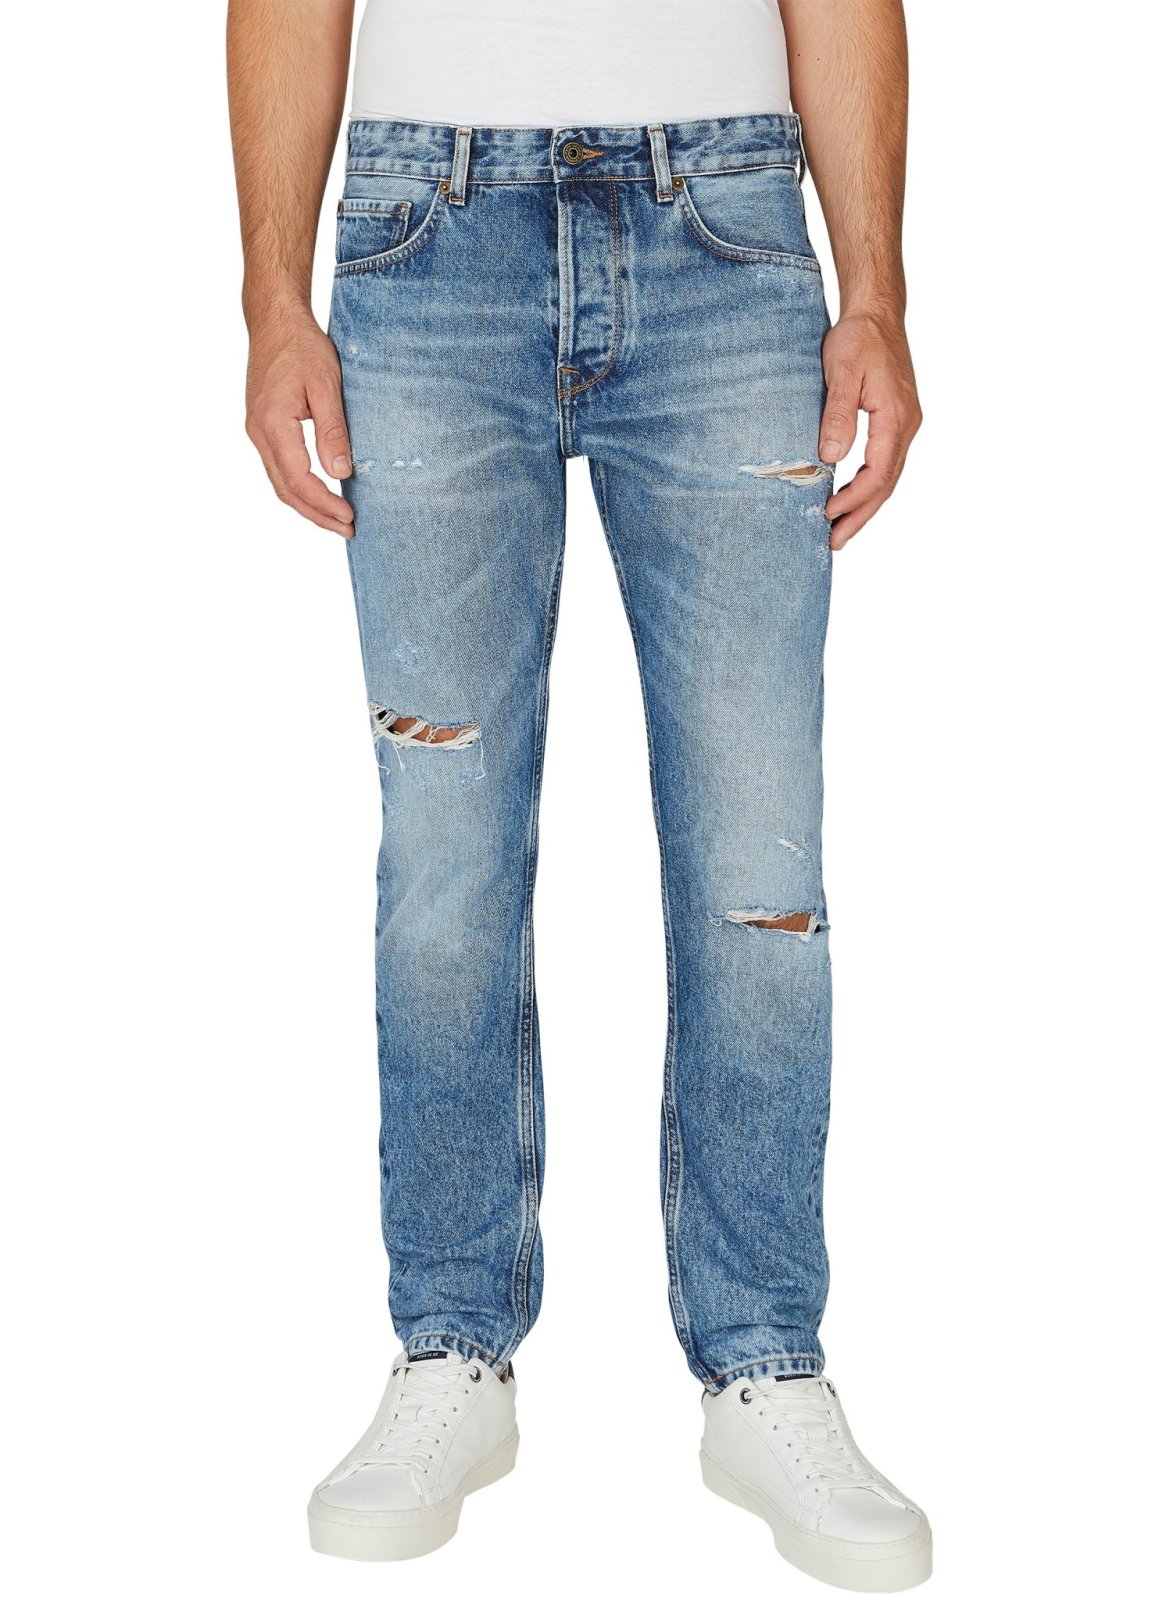 TAPERED JEANS